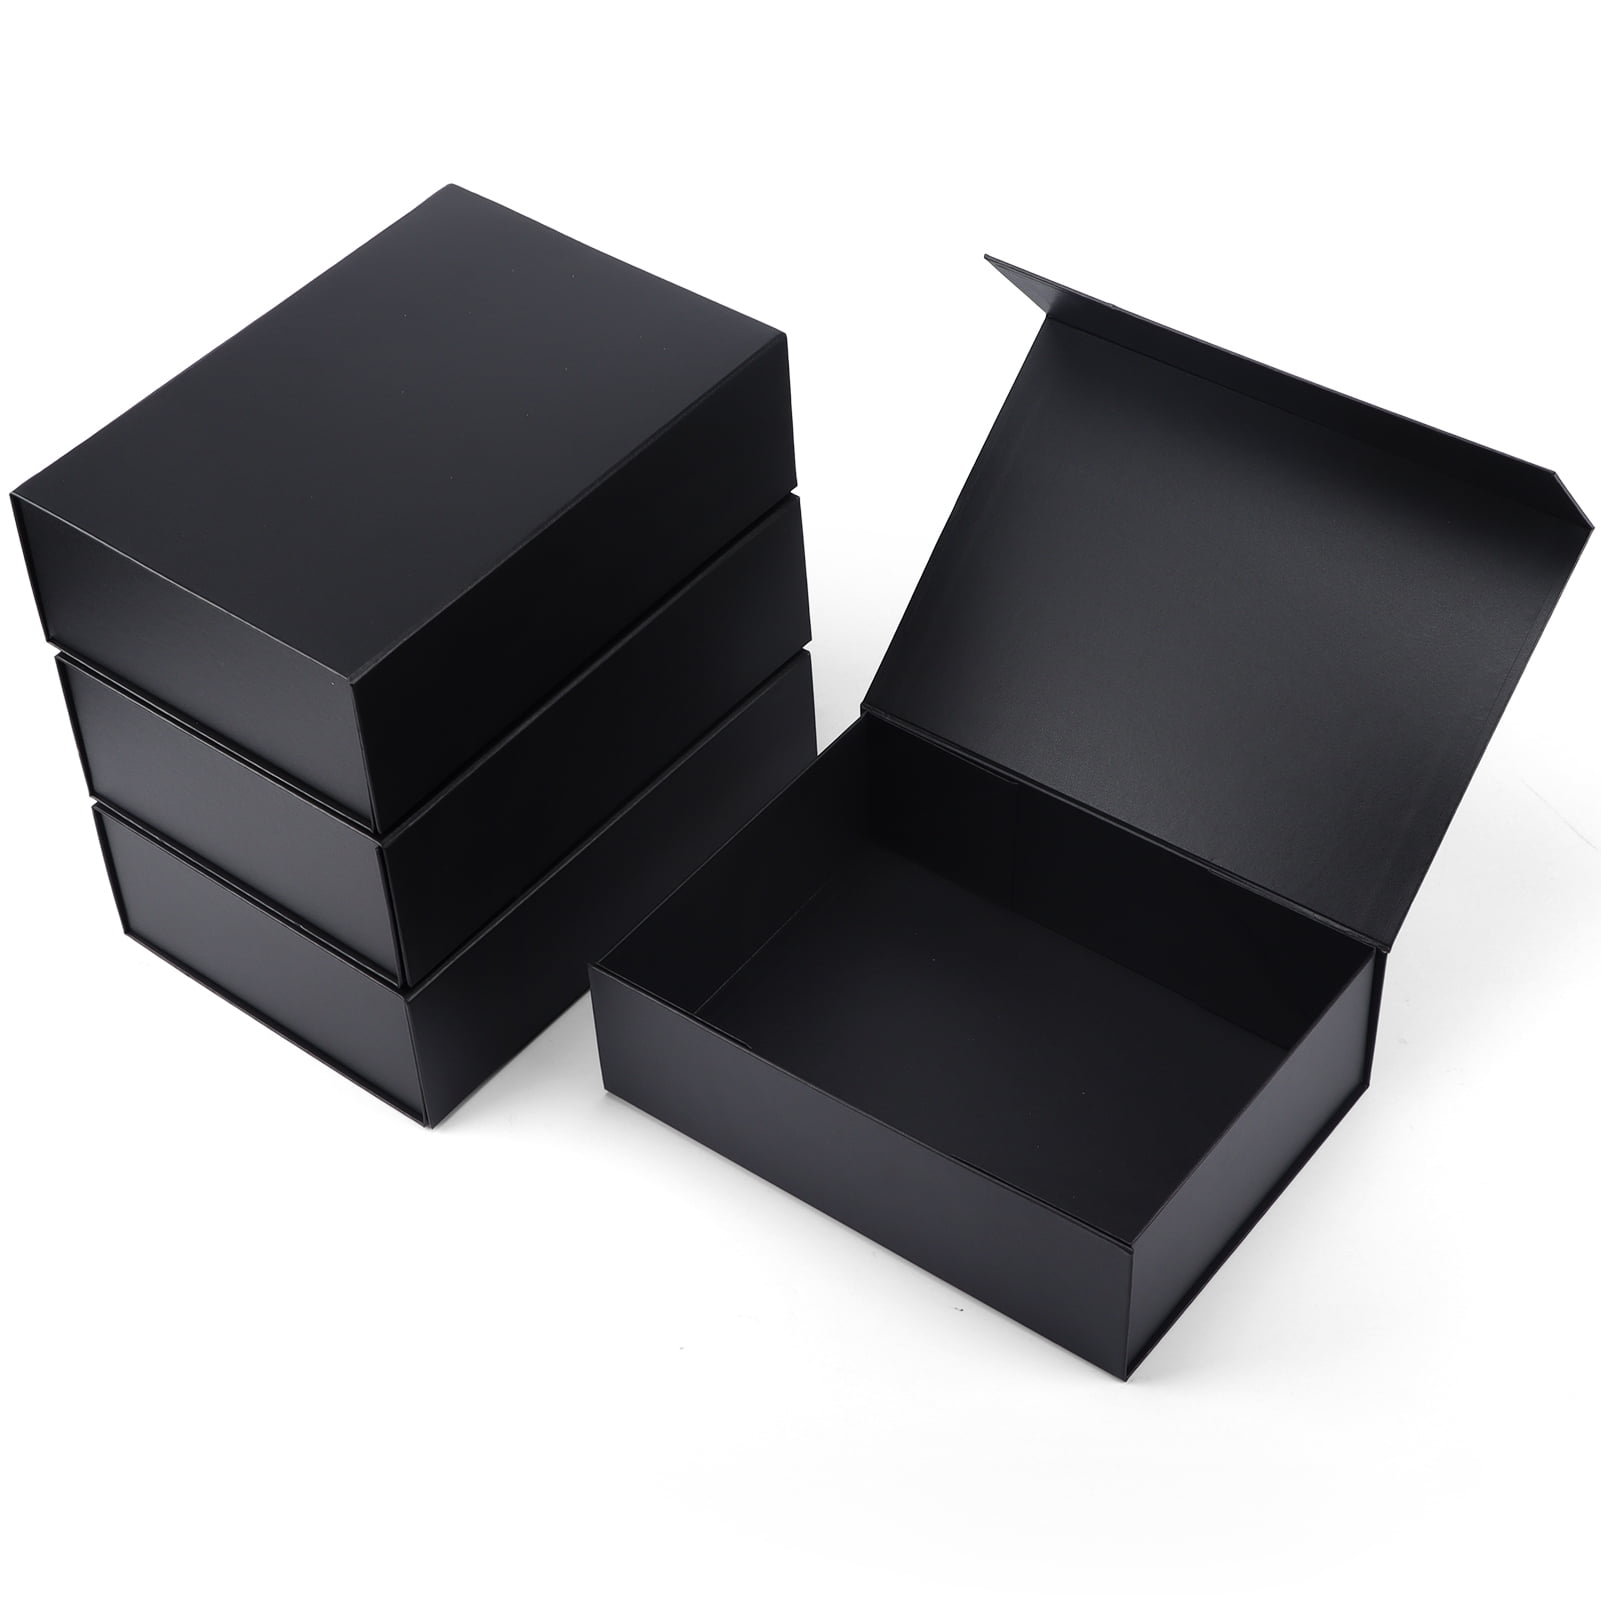 8x8x4 Magnetic Gift Boxes Set of 4, Black Magnetic Box for Wedding, Groomsmen Bridesmaid Proposal, Birthdays, Mother's Day